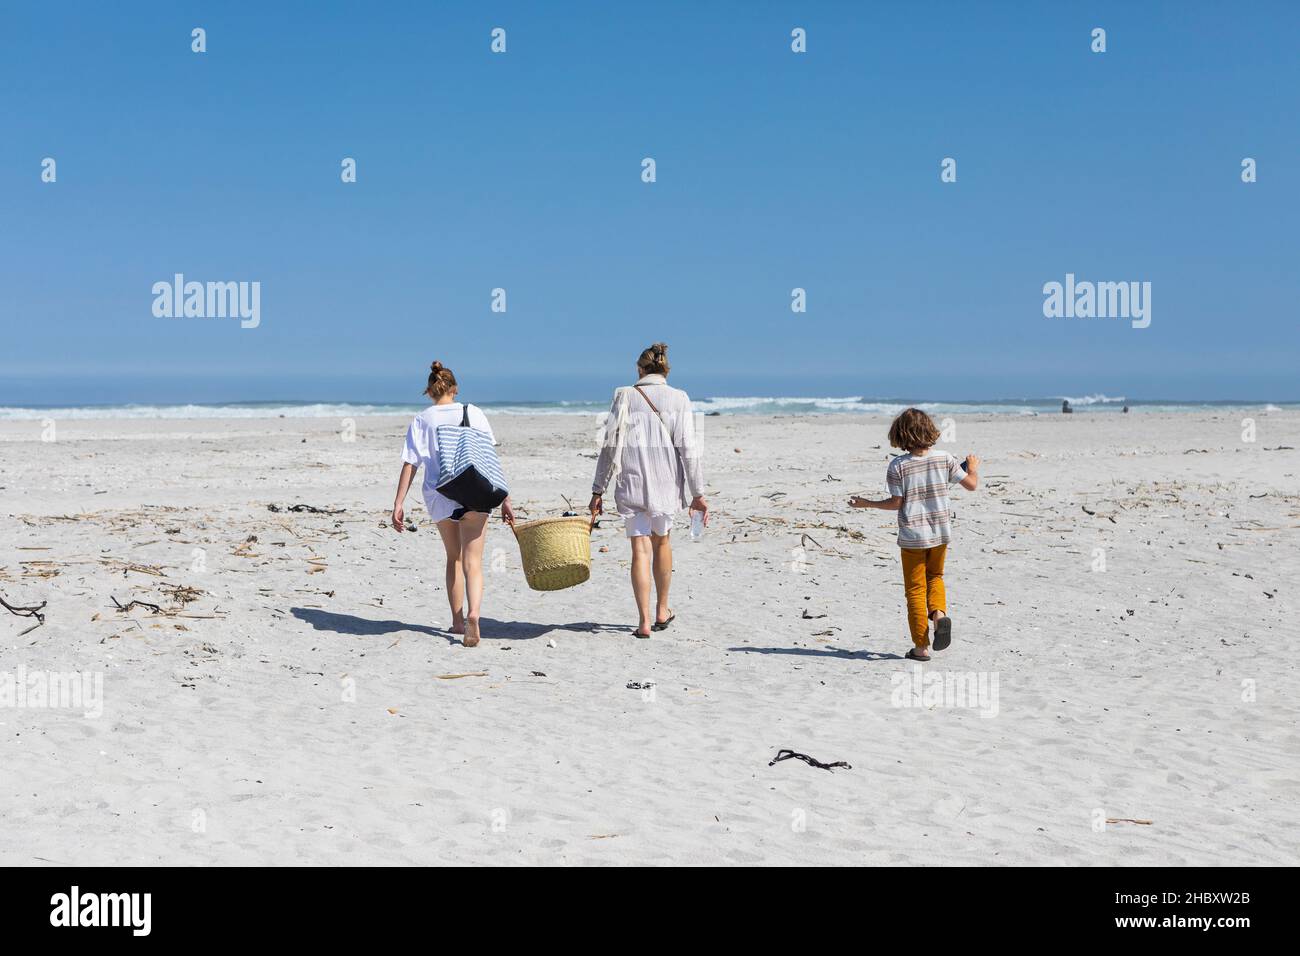 Mother and teenage daughter walking on a sandy beach carrying a basket, boy following. Stock Photo